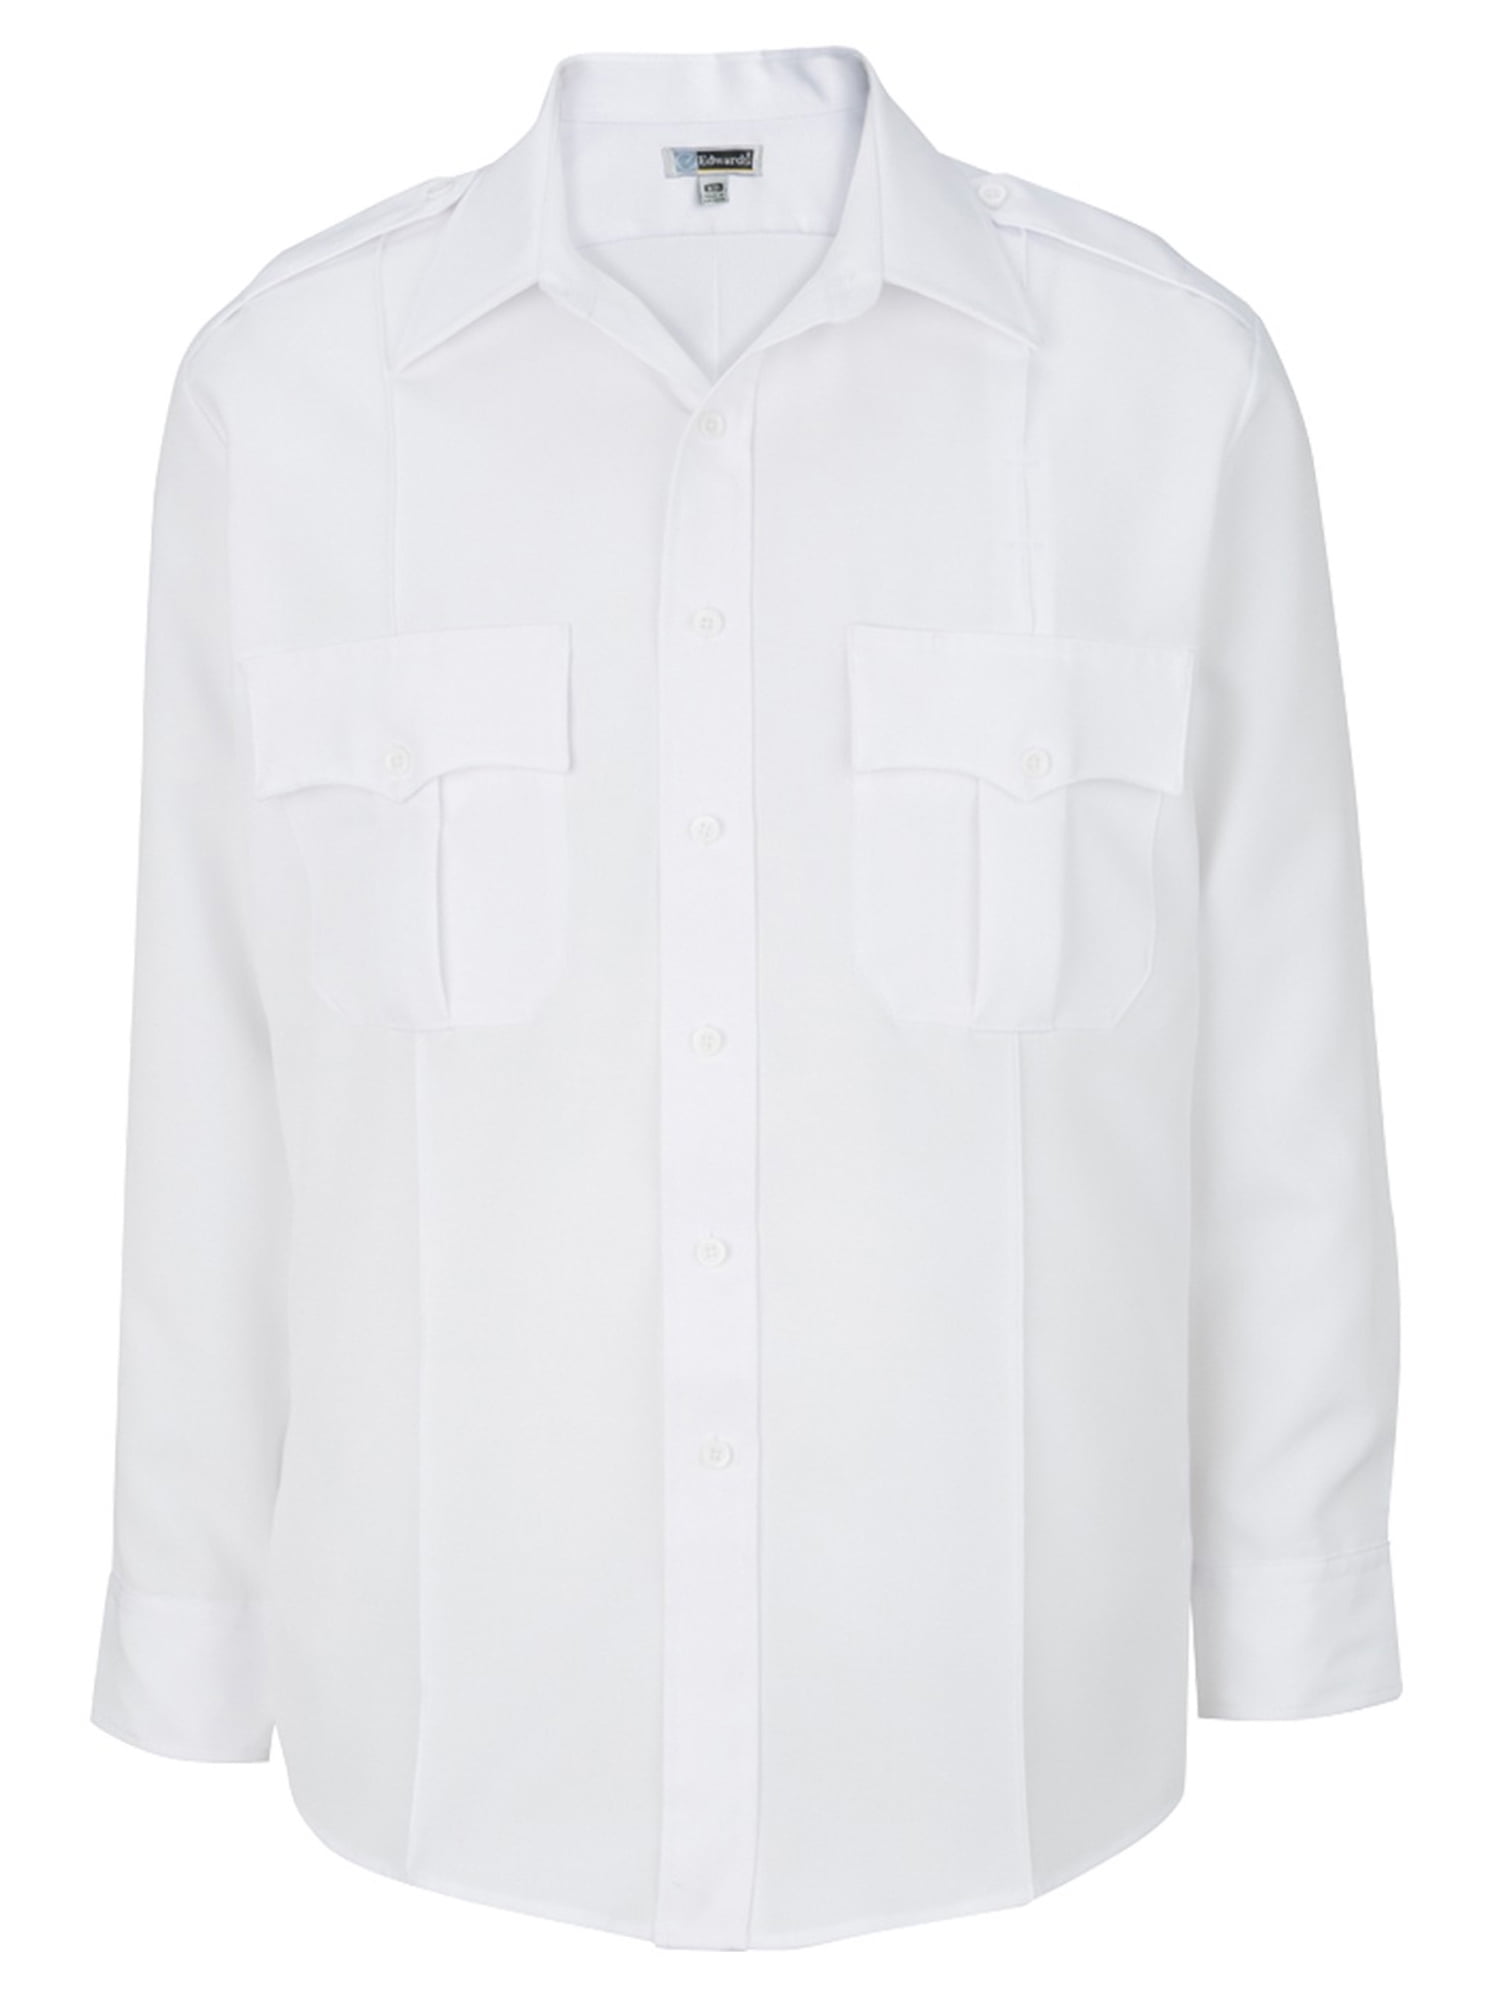 L 37 White Edwards Permanent Collar Stays Security Shirt 